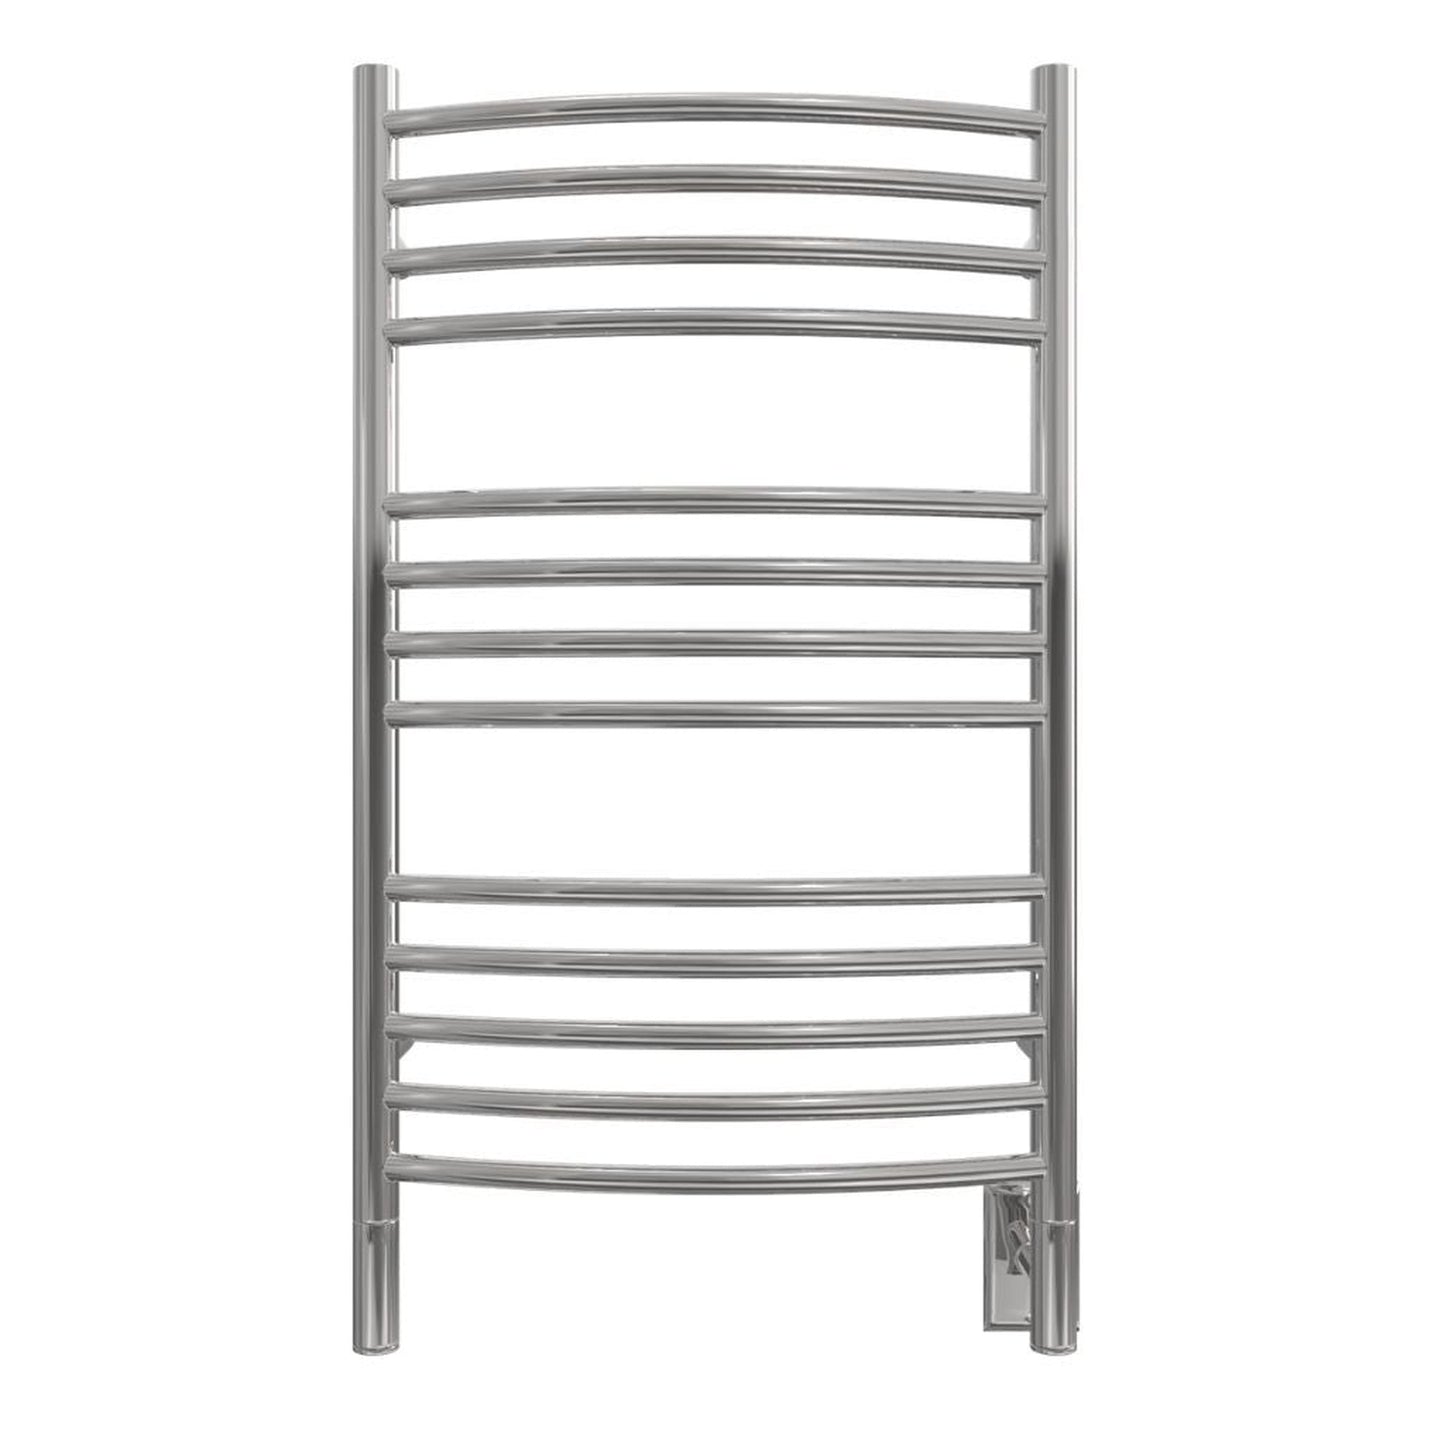 Amba Jeeves C Curved 13-Bar Polished Stainless Steel Finish Hardwired Towel Warmer